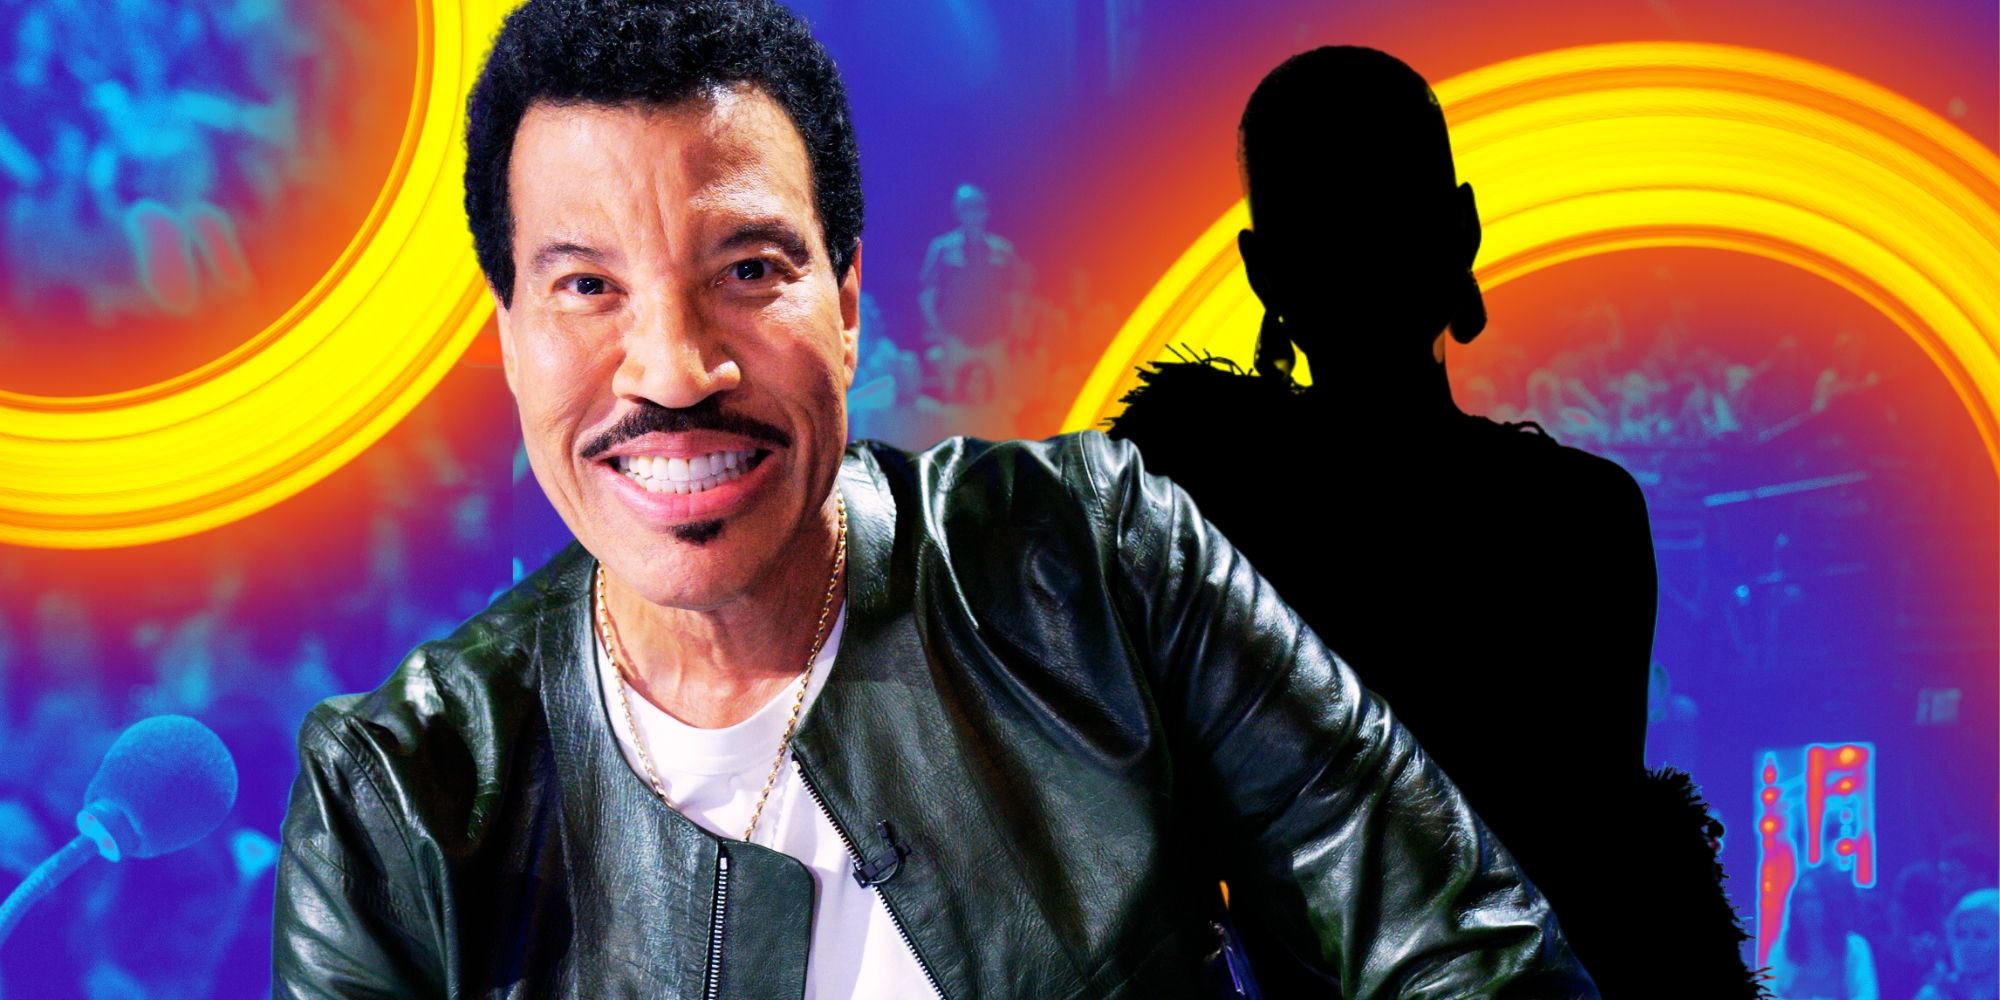 American Idol's Lionel Richie and silhouette of mystery woman, in front of studio audience